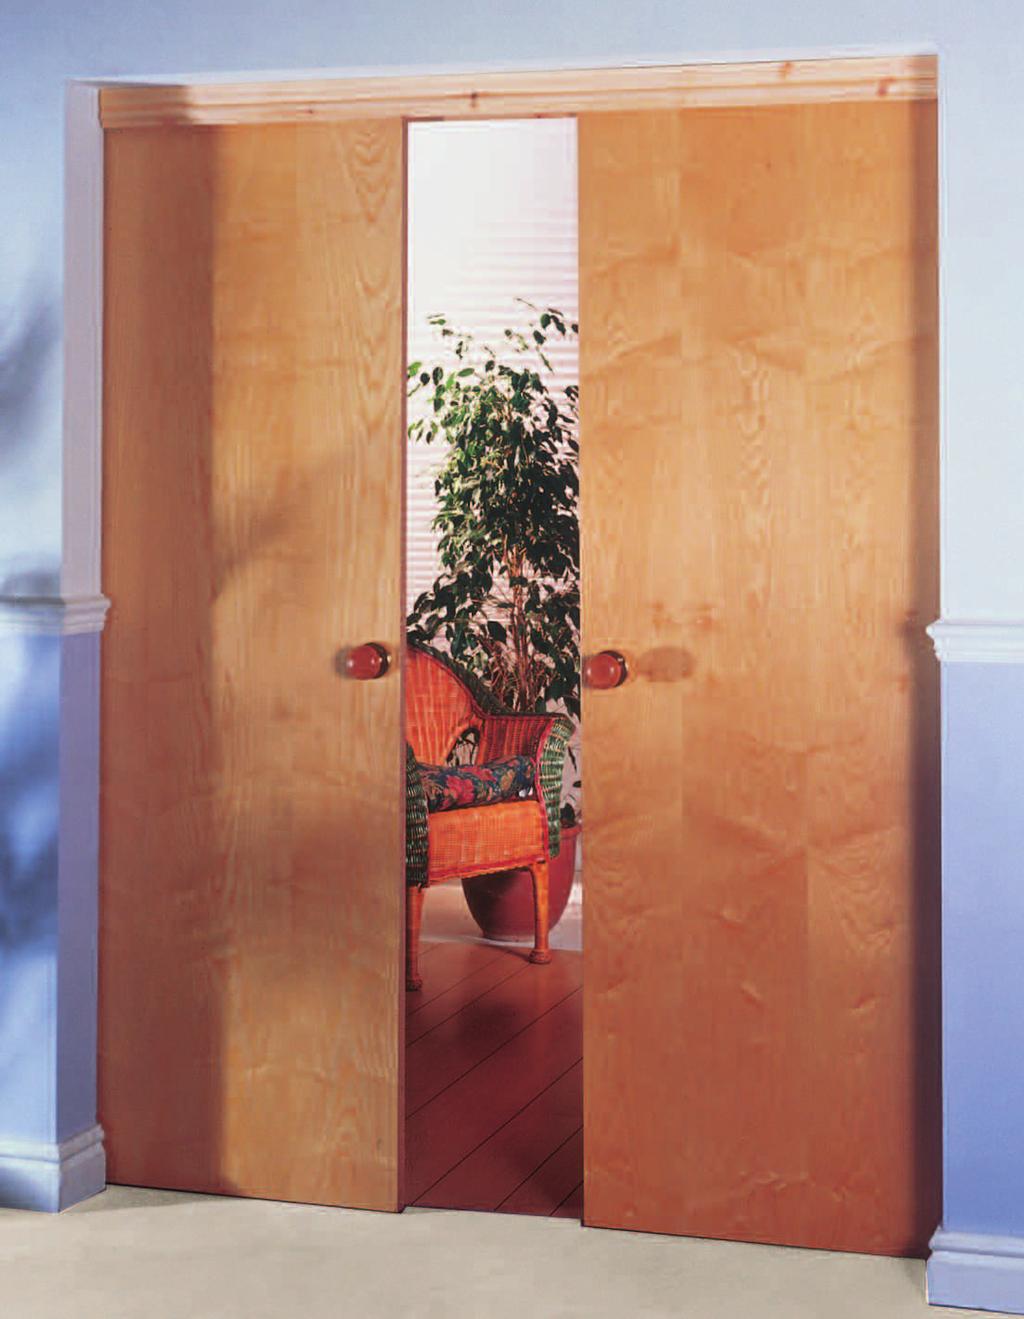 Marathon 55 for sliding doors up to 55kg used for heavy-duty residential and light commercial applications, doors & partitions for timber, timber framed or composite doors easily adjusted door height